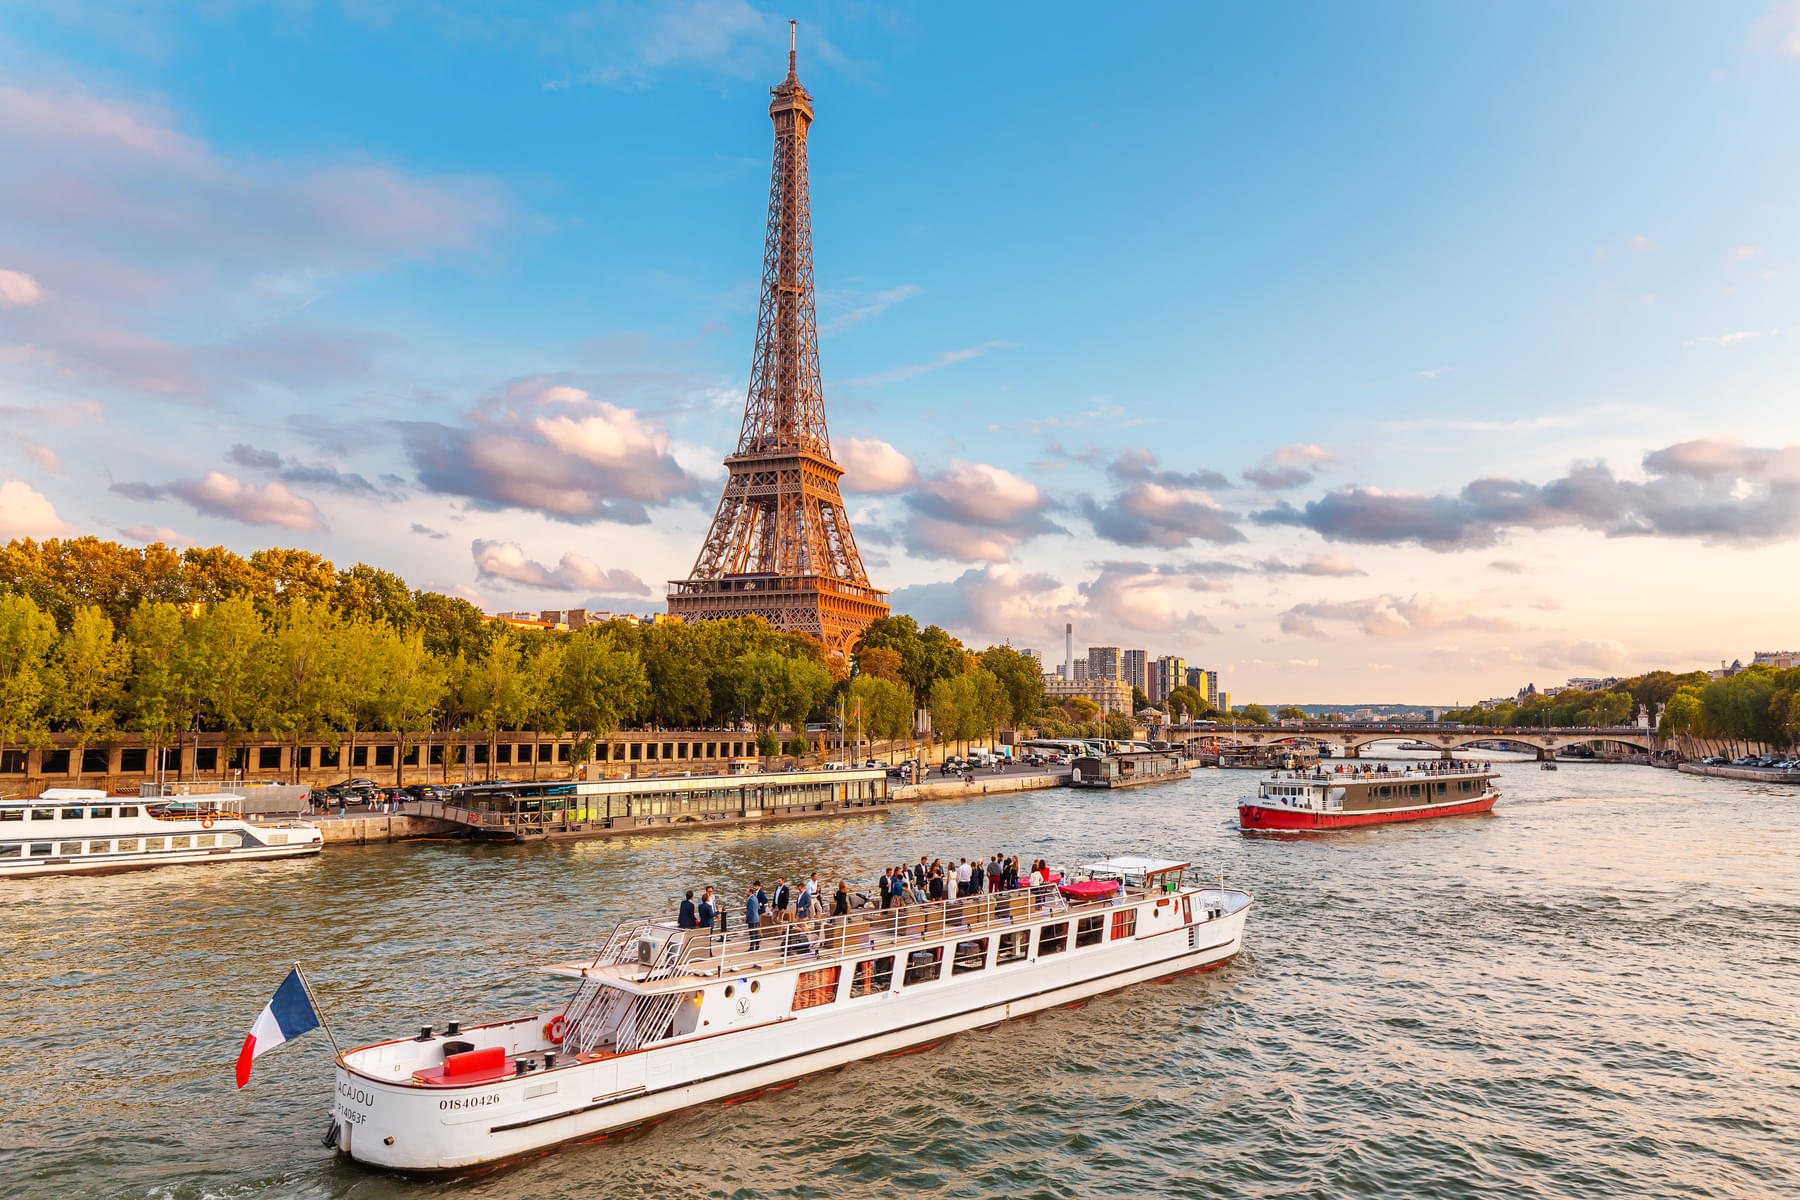 Step into history and ascend the iconic Eiffel Tower